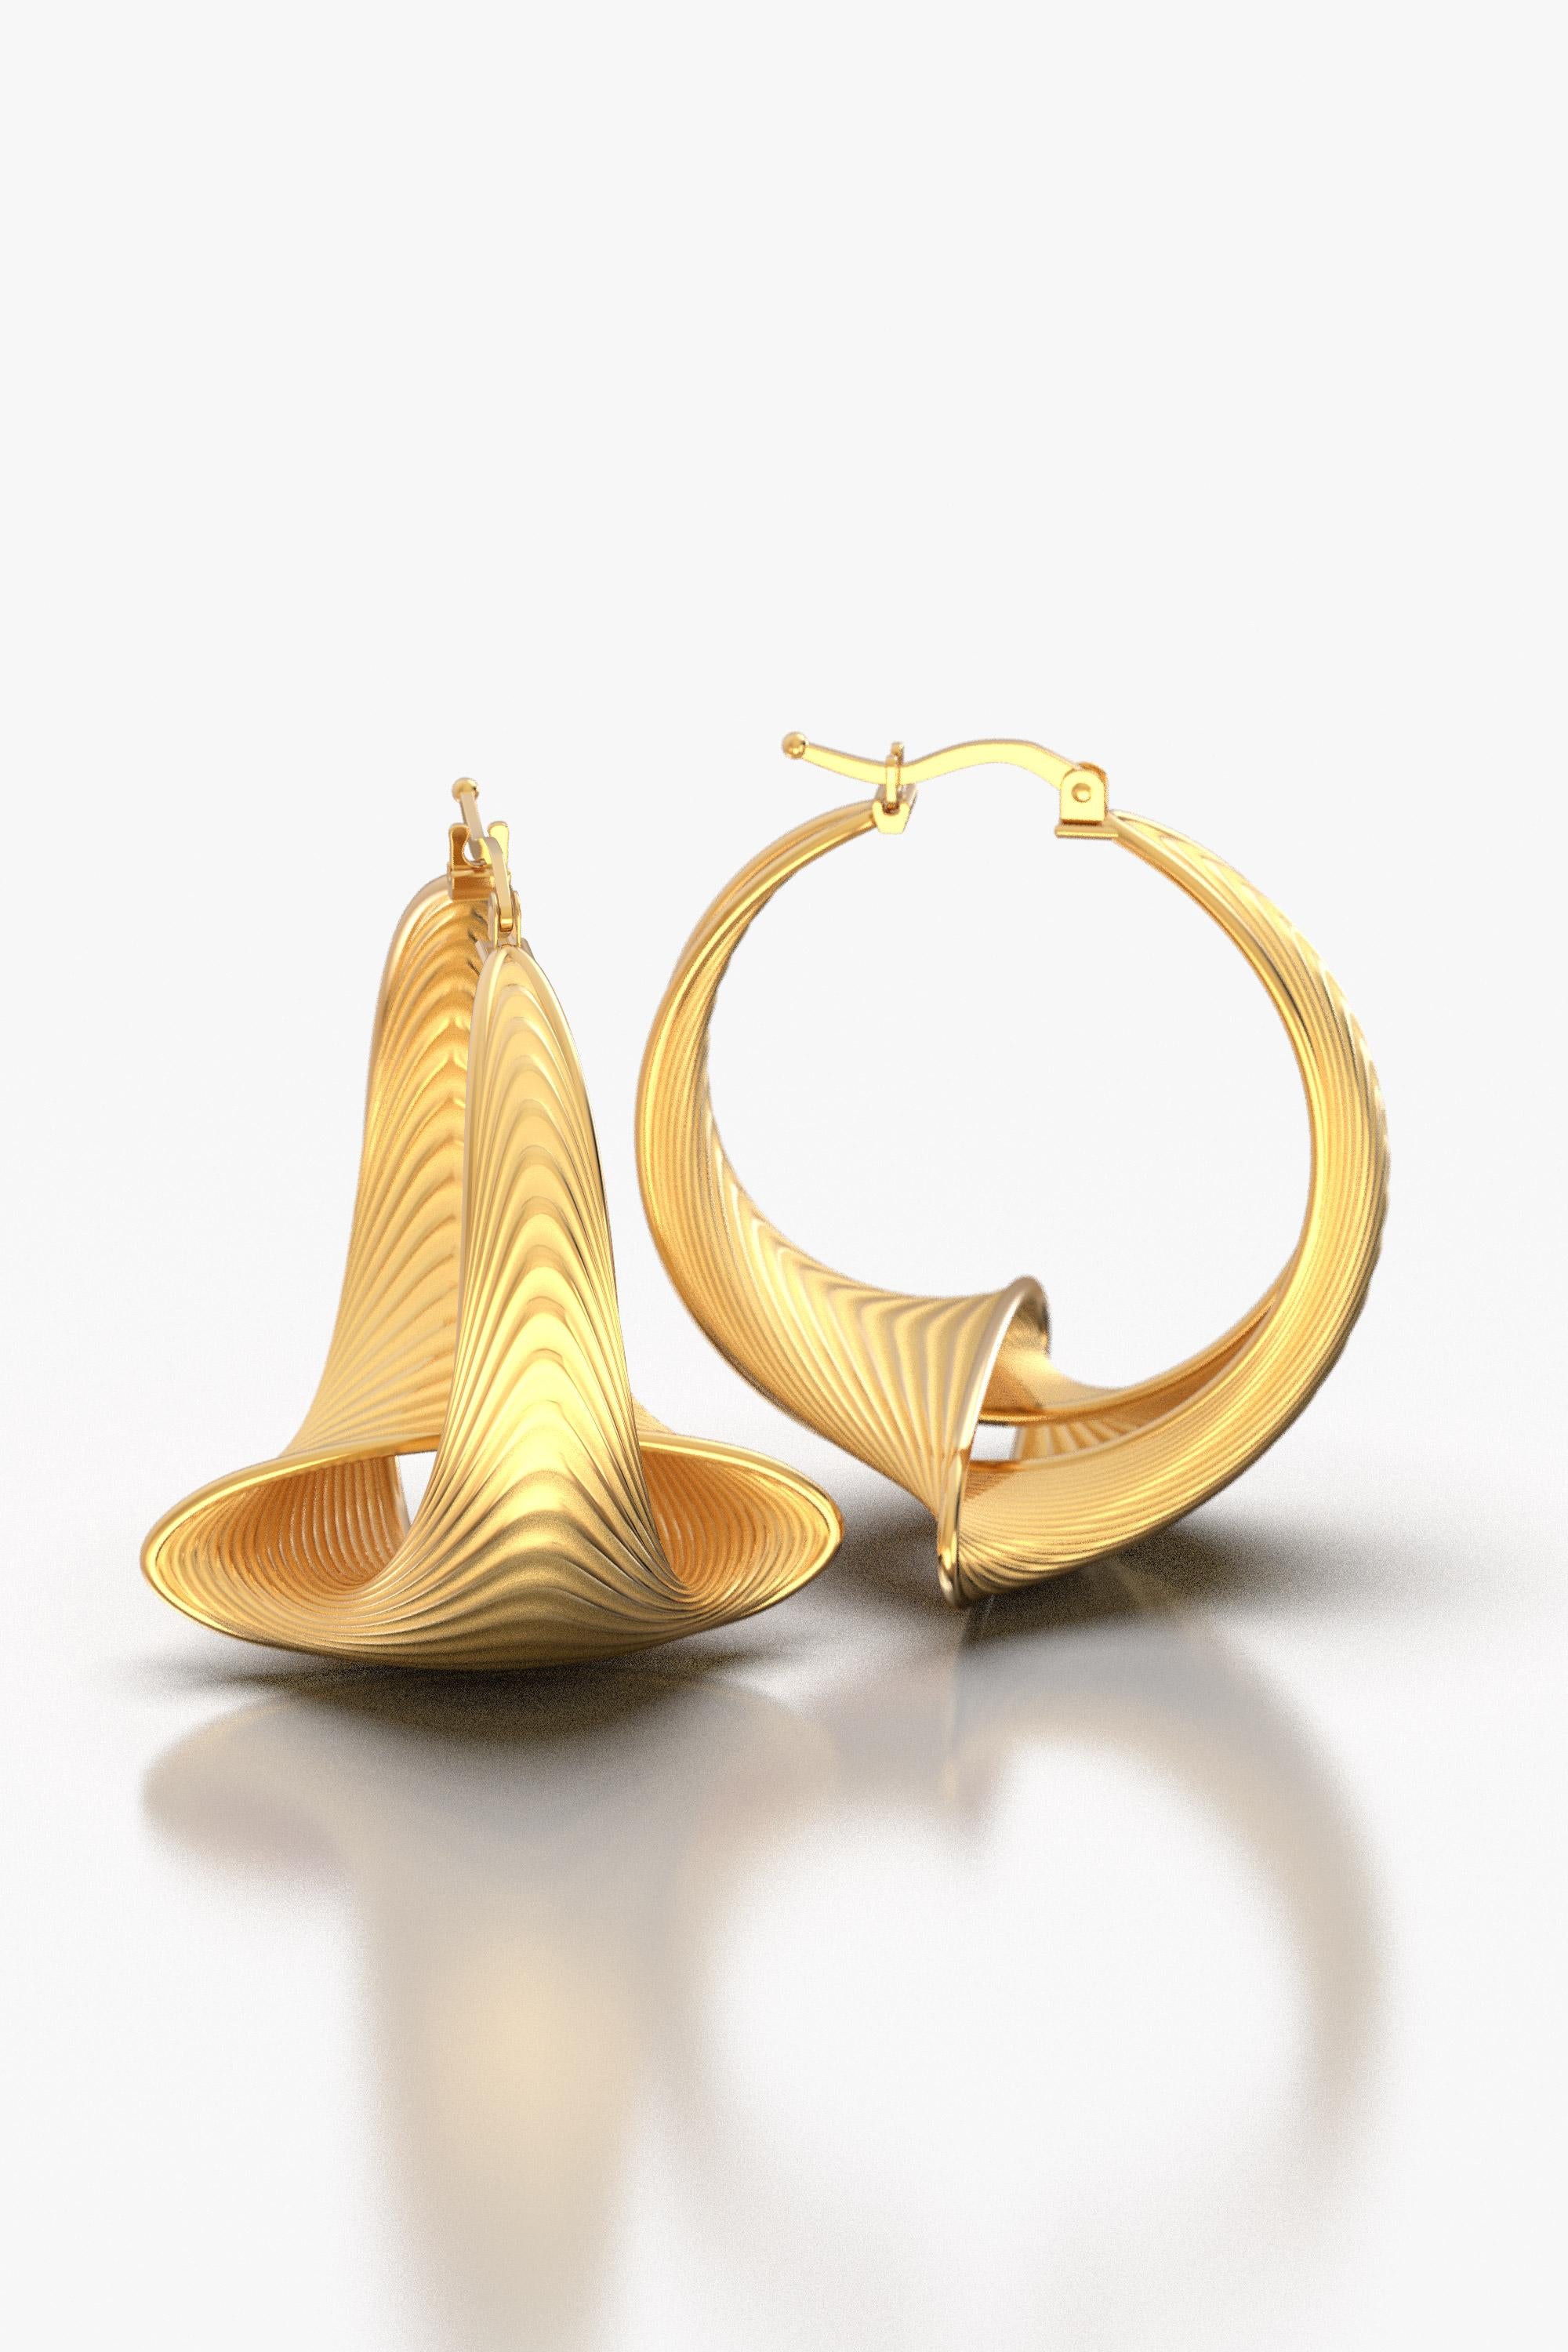 Oltremare Gioielli 18k Gold Hoop Earrings Made in Italy, Italian Gold Jewelry For Sale 3